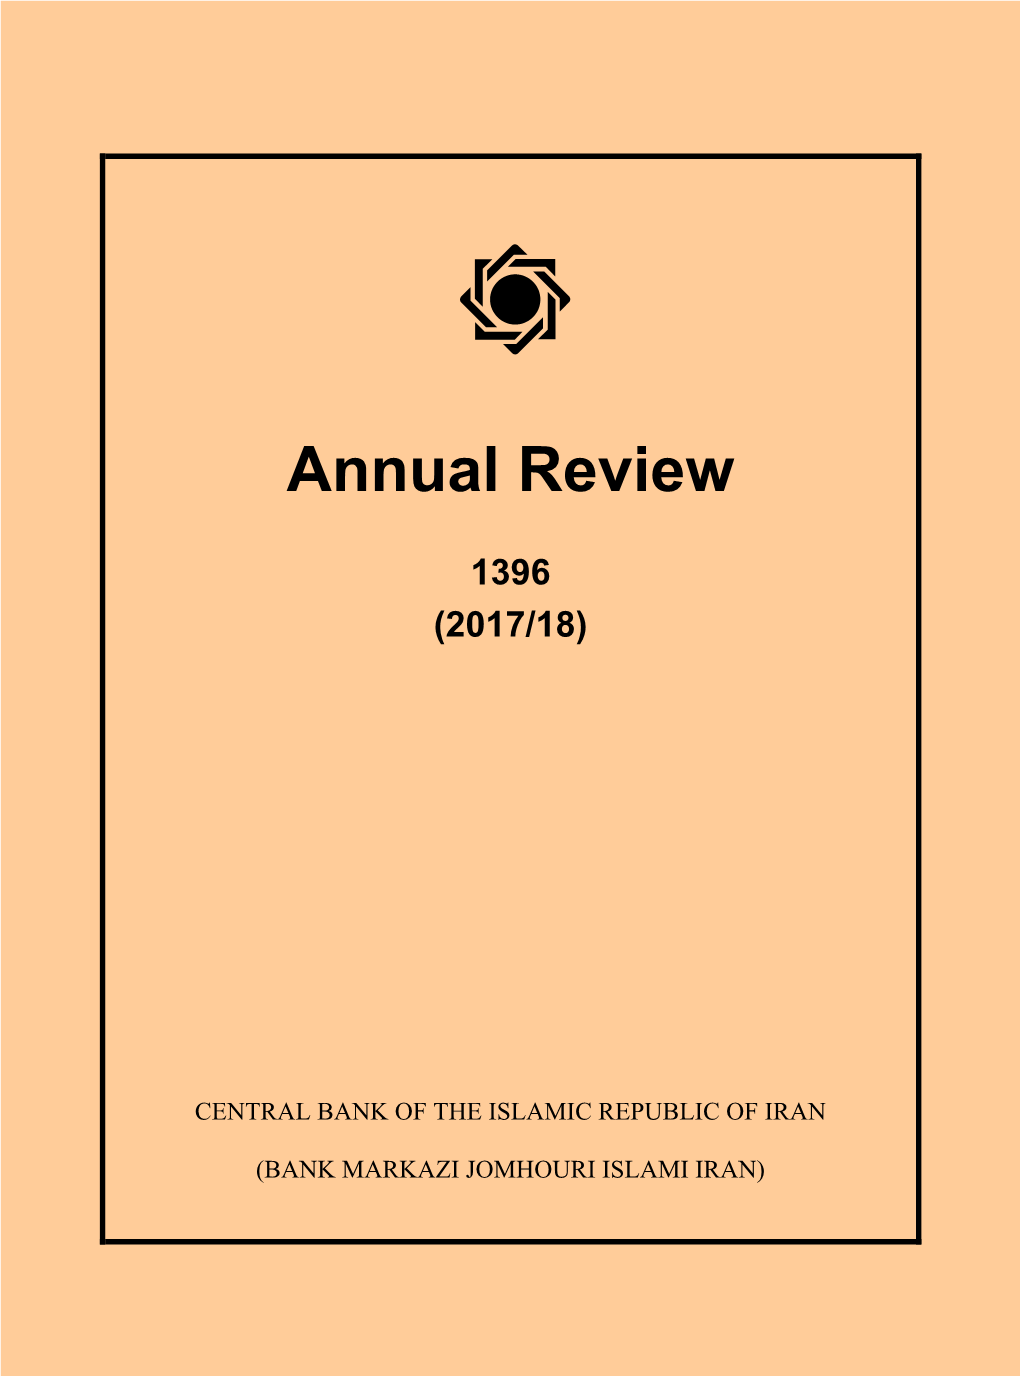 Annual Review 2017/18